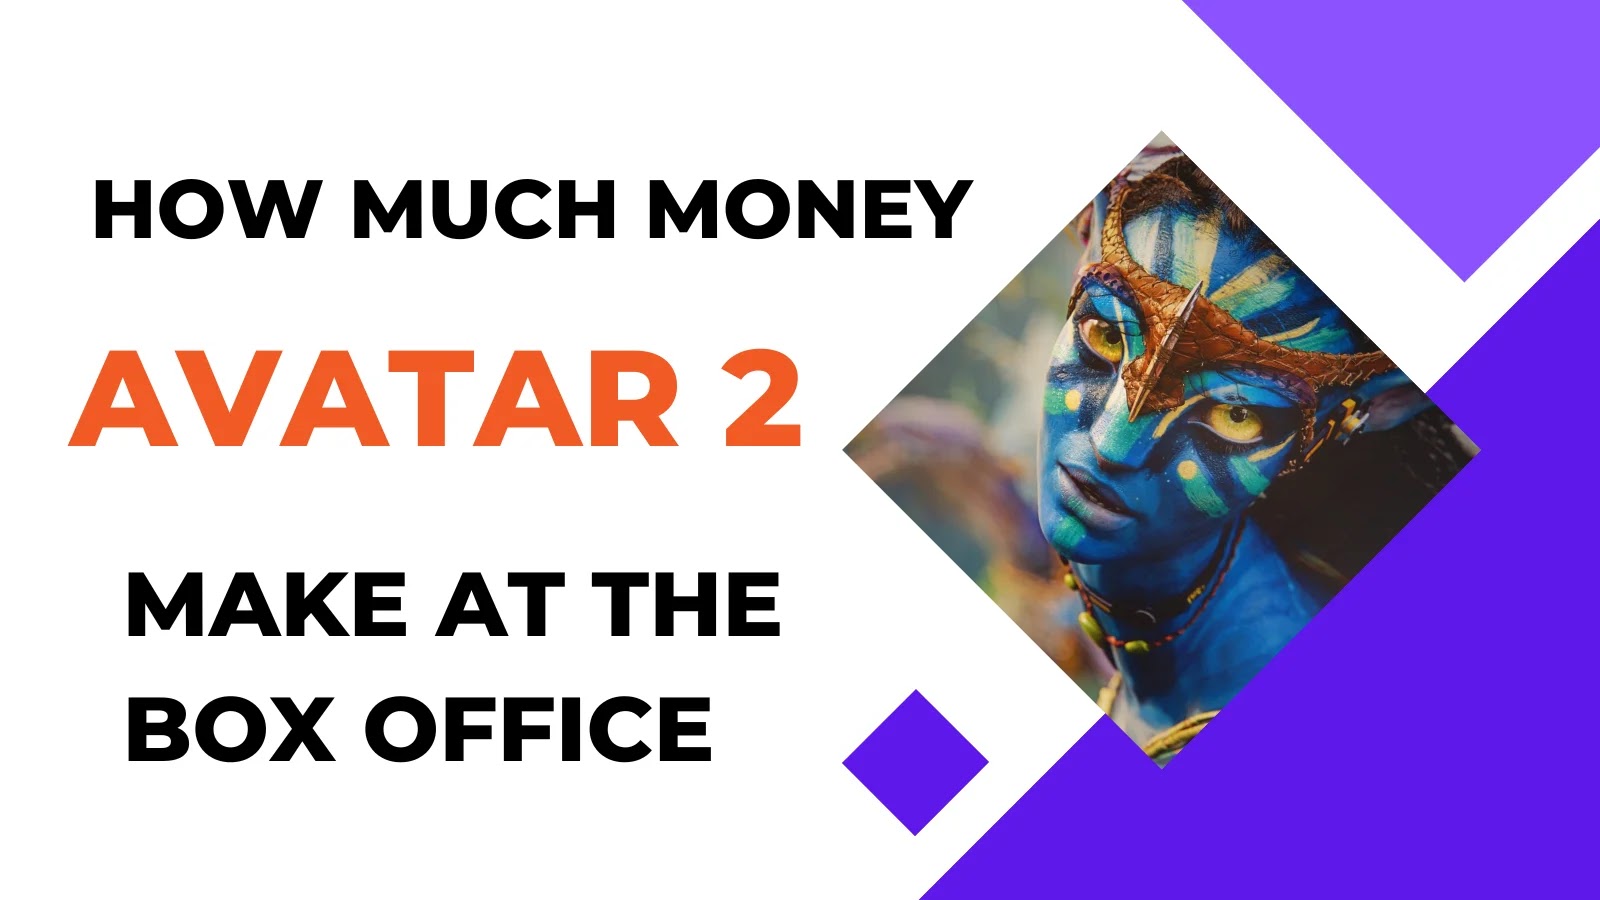 how much money,much money avatar,money avatar make,avatar make box,make box office,movie avatar screened,other producers should,after screening avatar,screening avatar only,avatar only thing